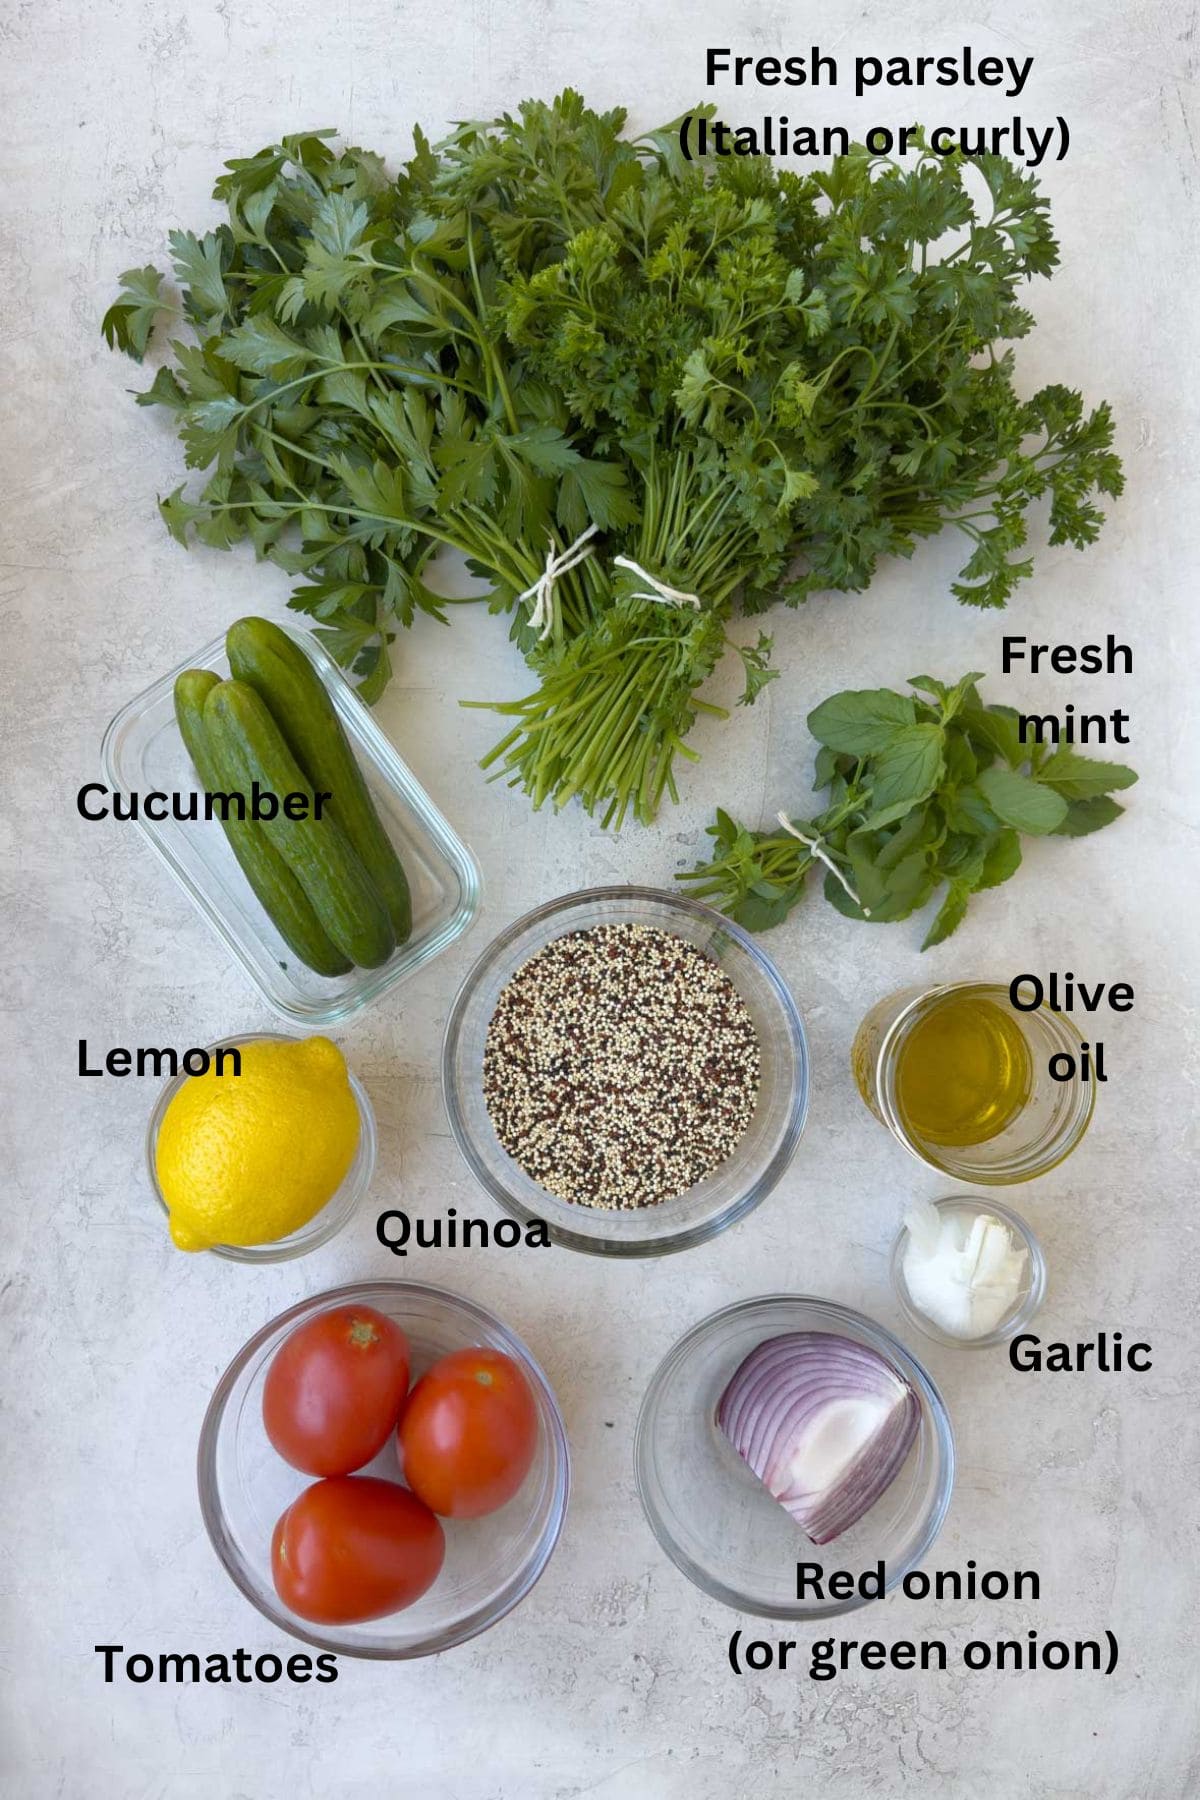 Fresh ingredients for tabouli (tabbouleh) with parsley, tomatoes, and herbs.
